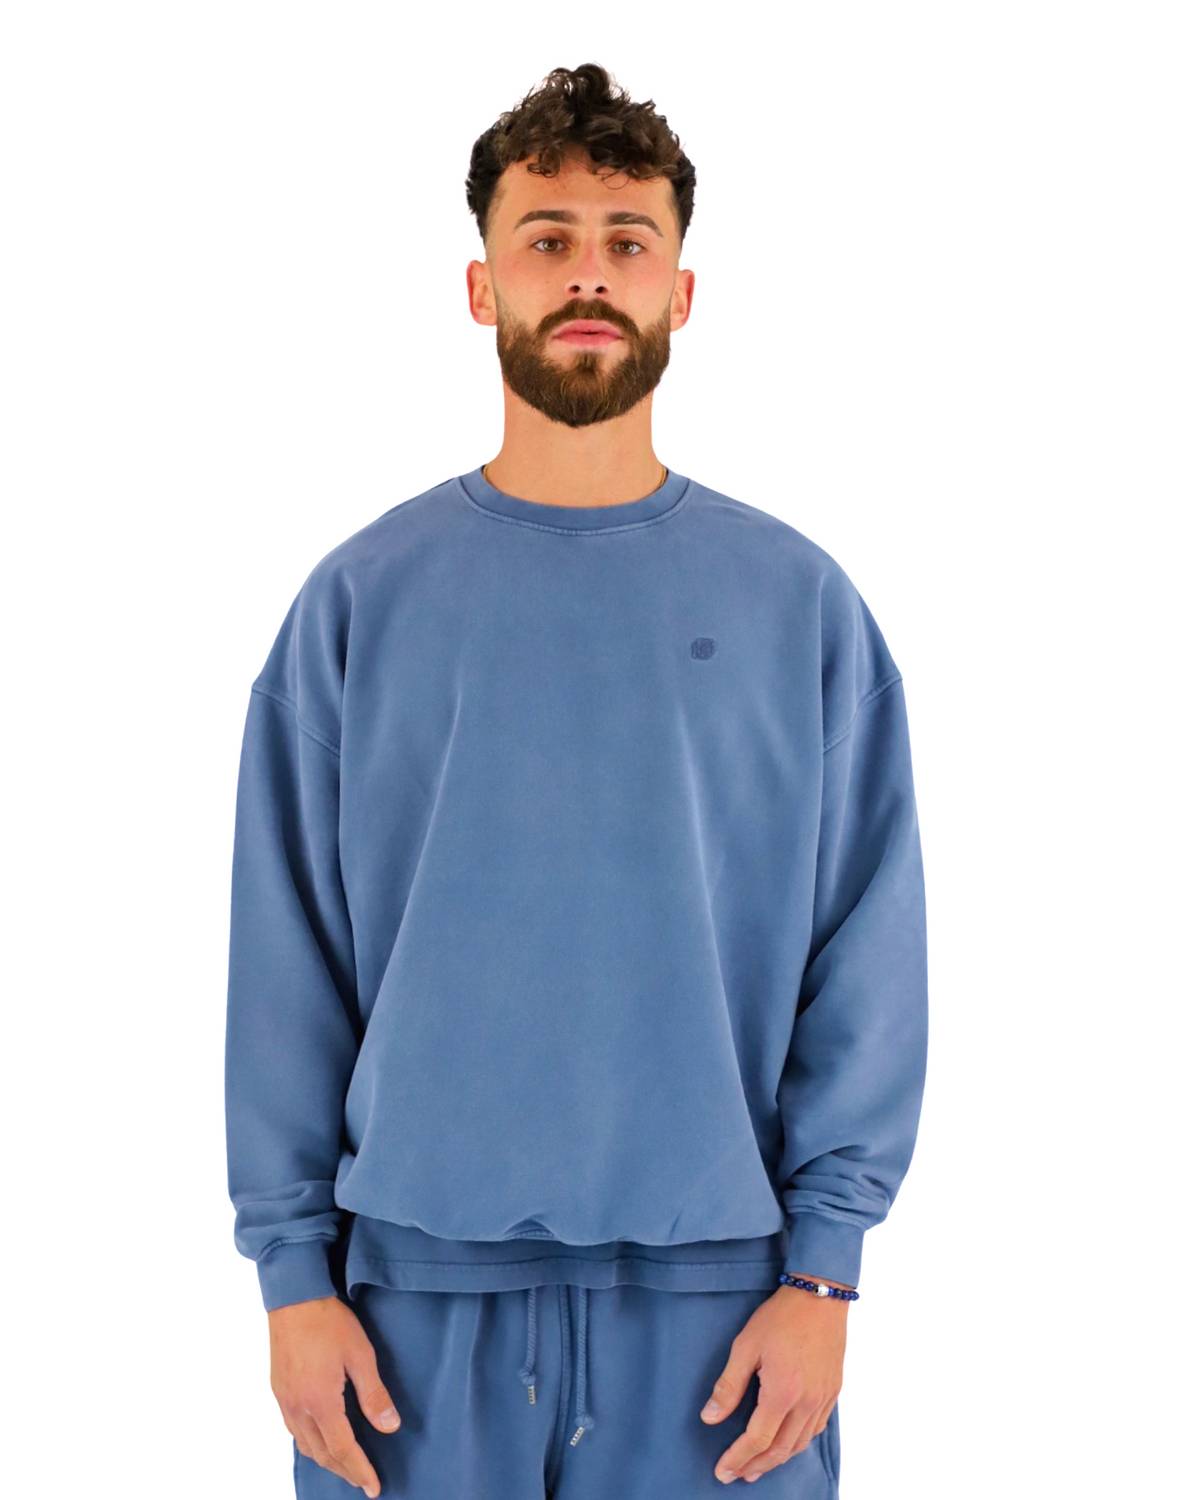 ALL-TIMES SWEATER WASHED-OUT NAVY